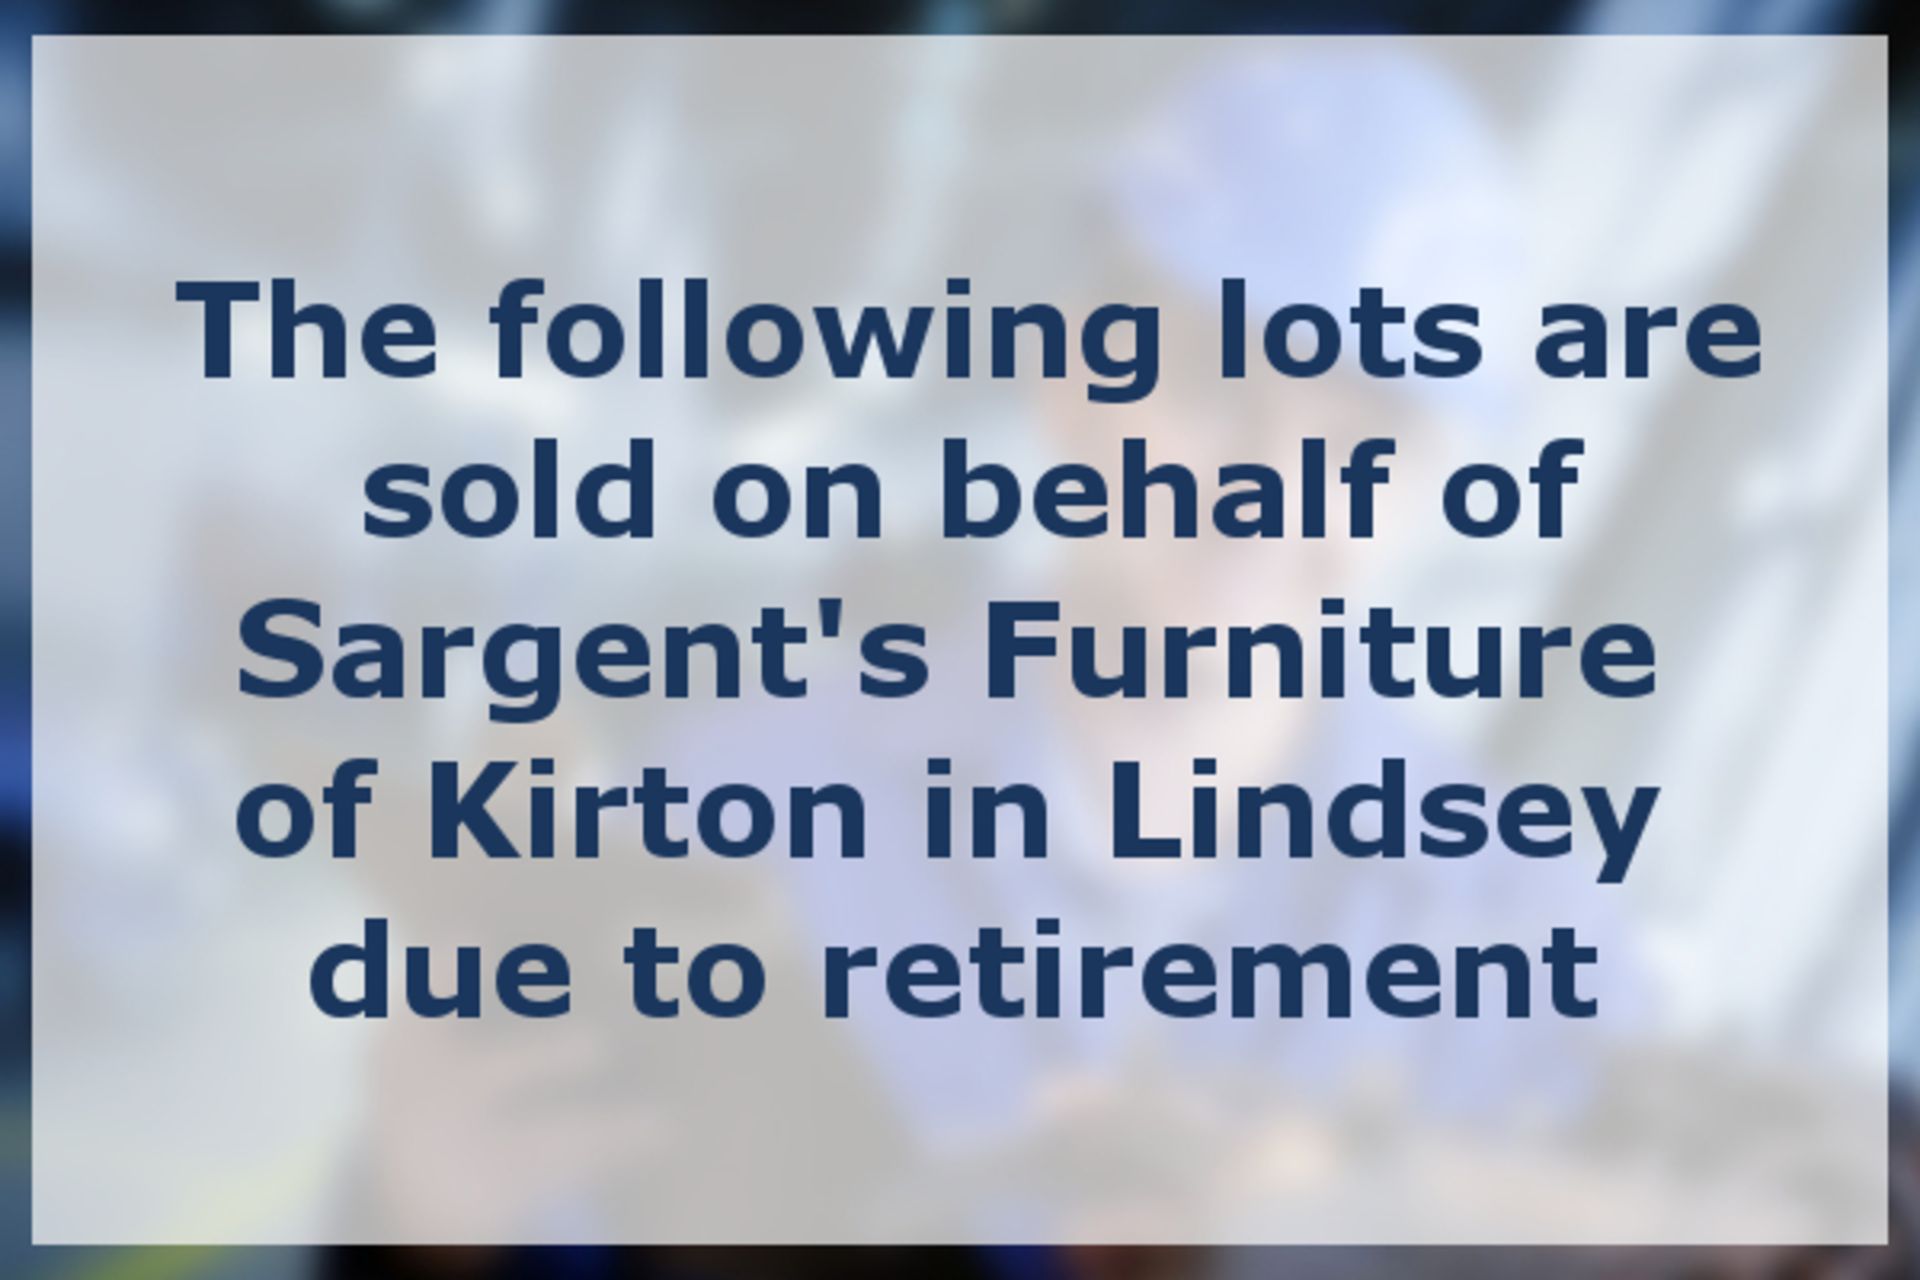 Lots 50-143B sold on behalf of Sargent's Furniture of Kirton Lindsey due to retirement